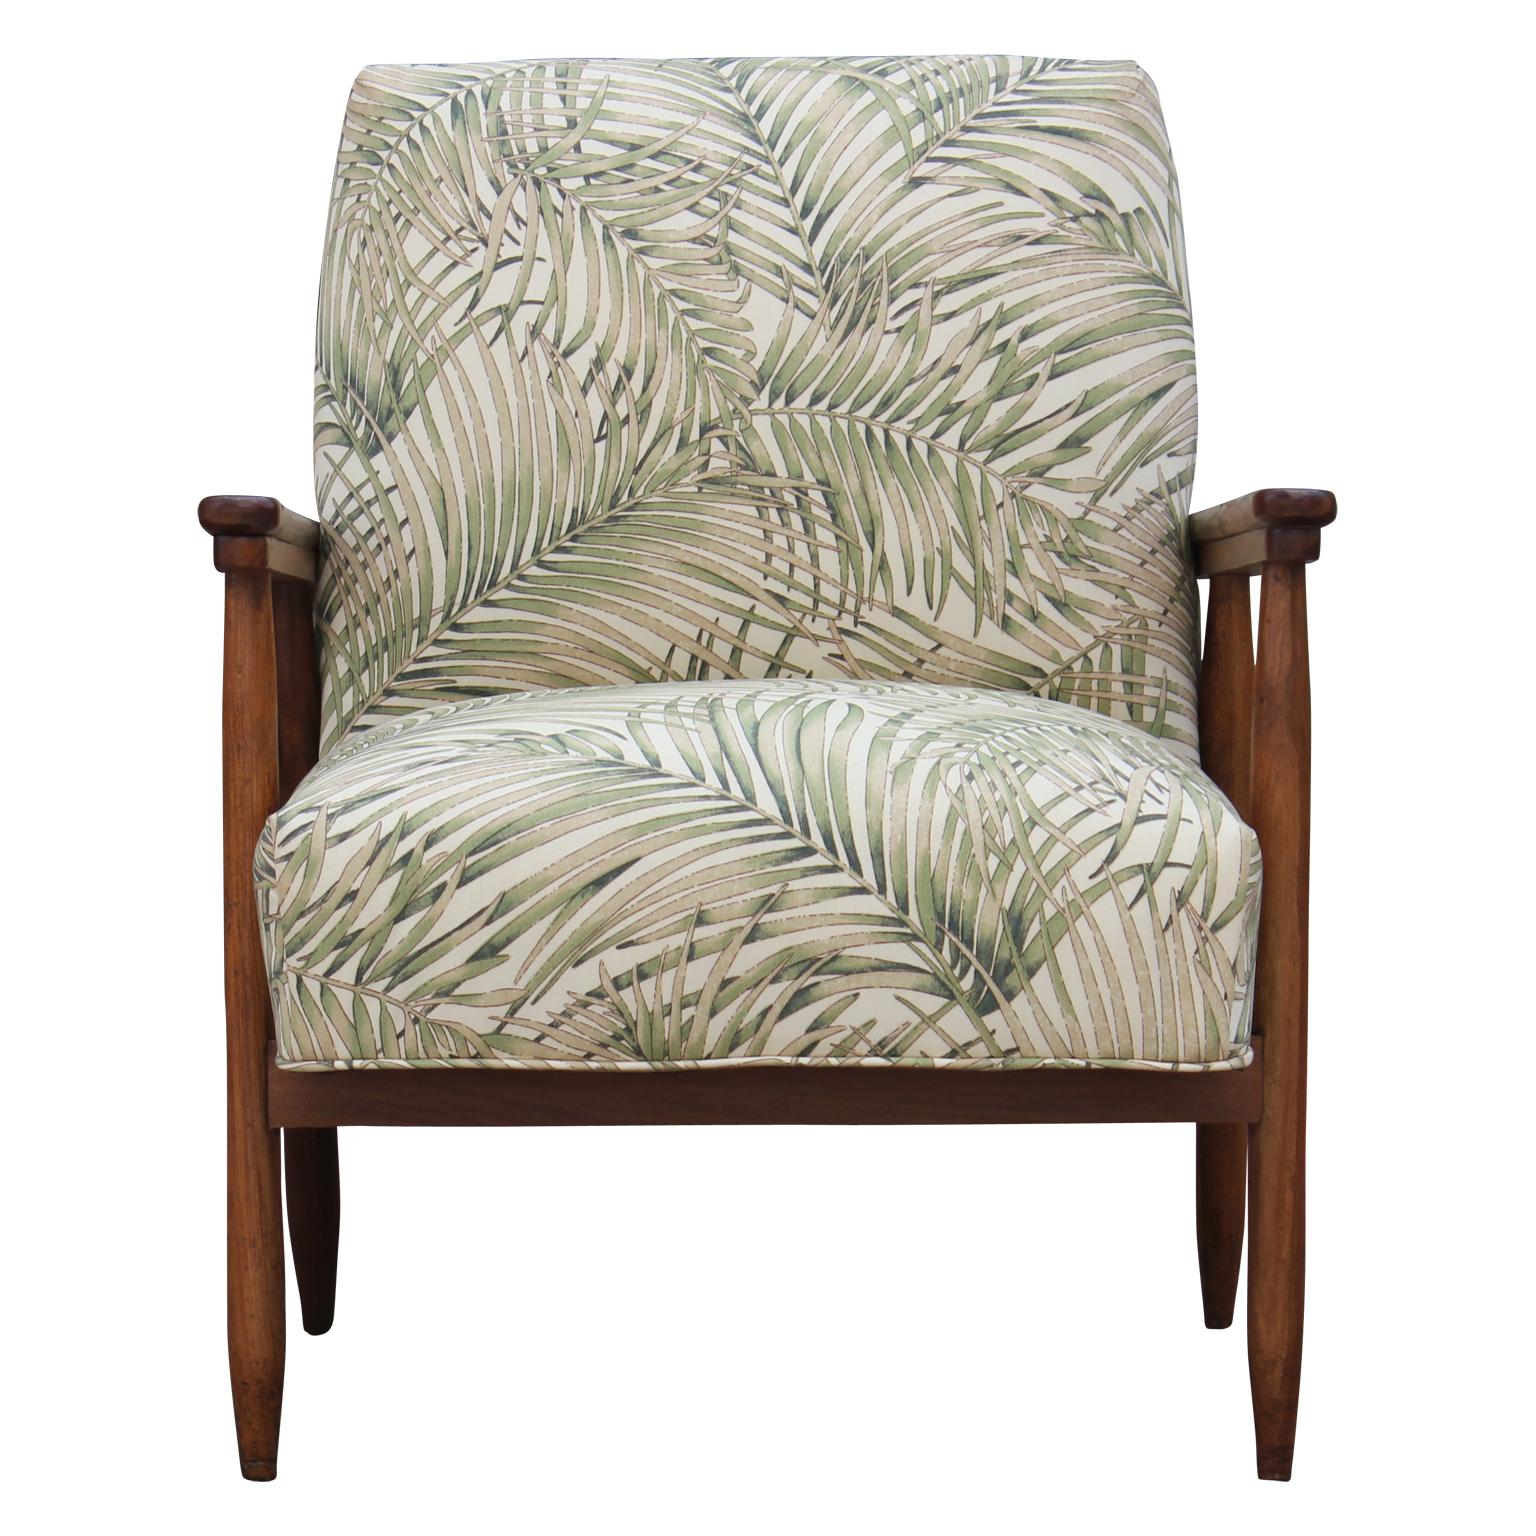 Pair of gorgeous modern Italian Danish style lounge chairs. Freshly upholstered in a lovely palm leaf pattern. In the style of Hans Wegner.